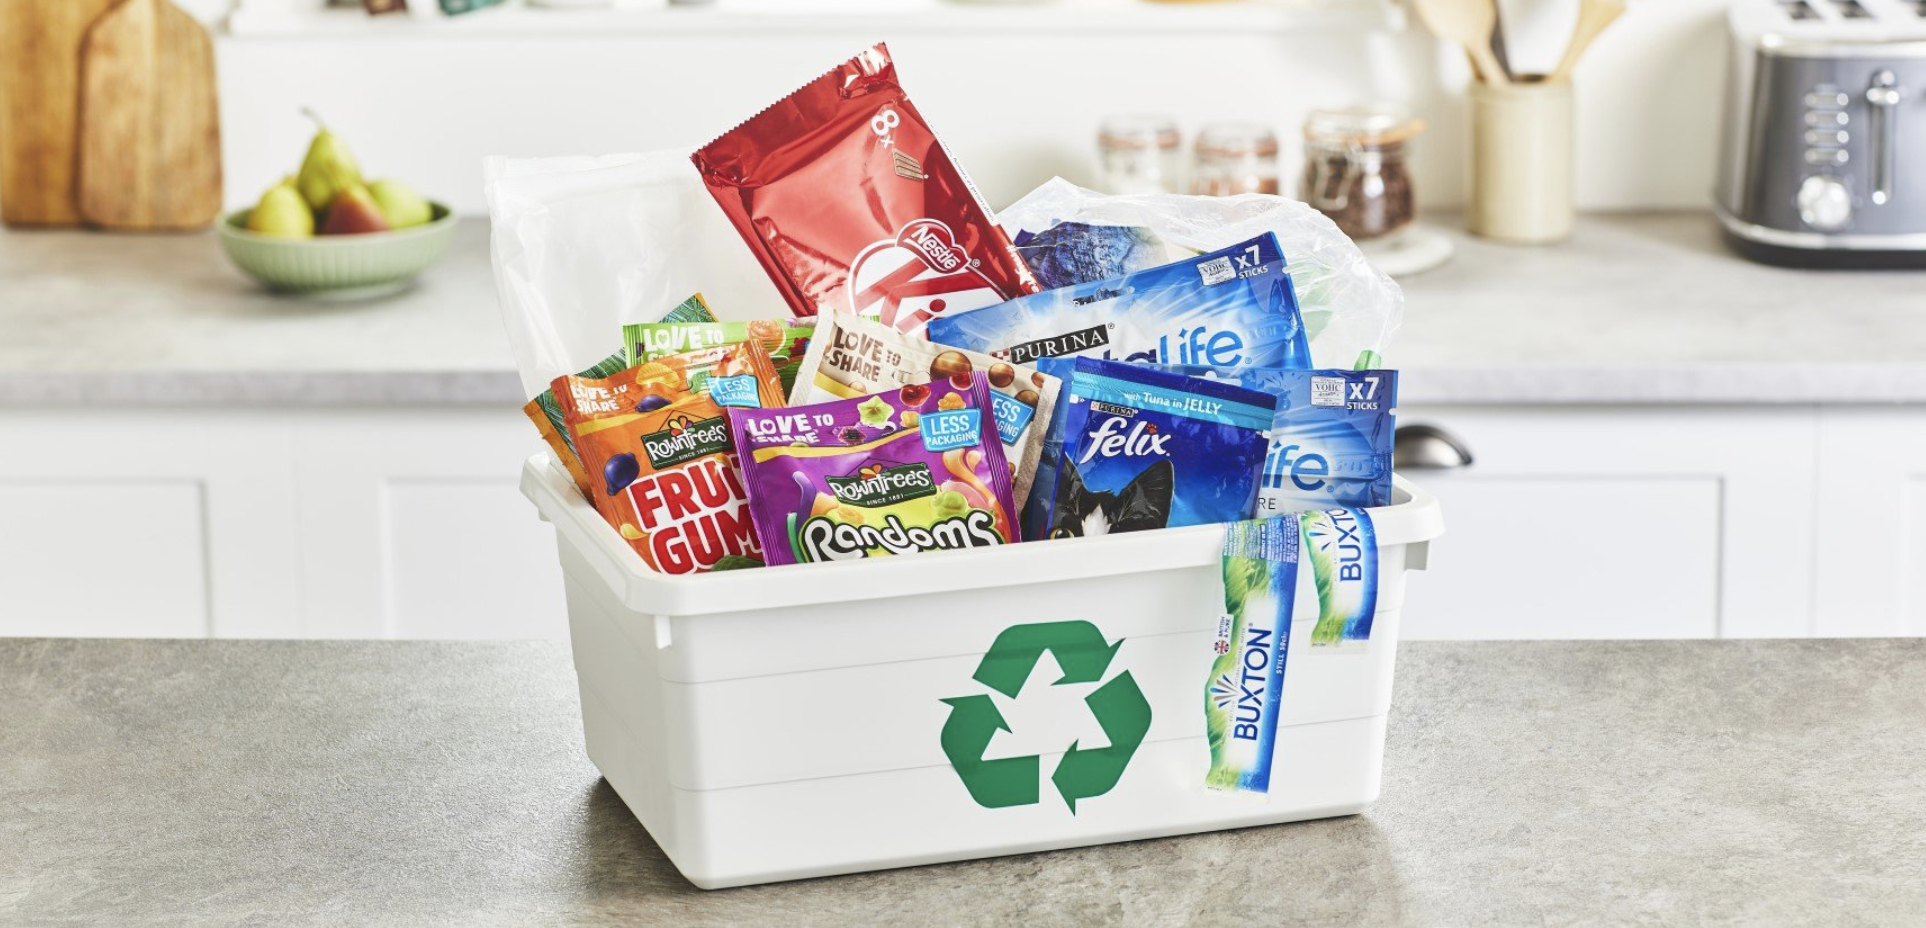 Nestlé invests £7m in pioneering recycling facility